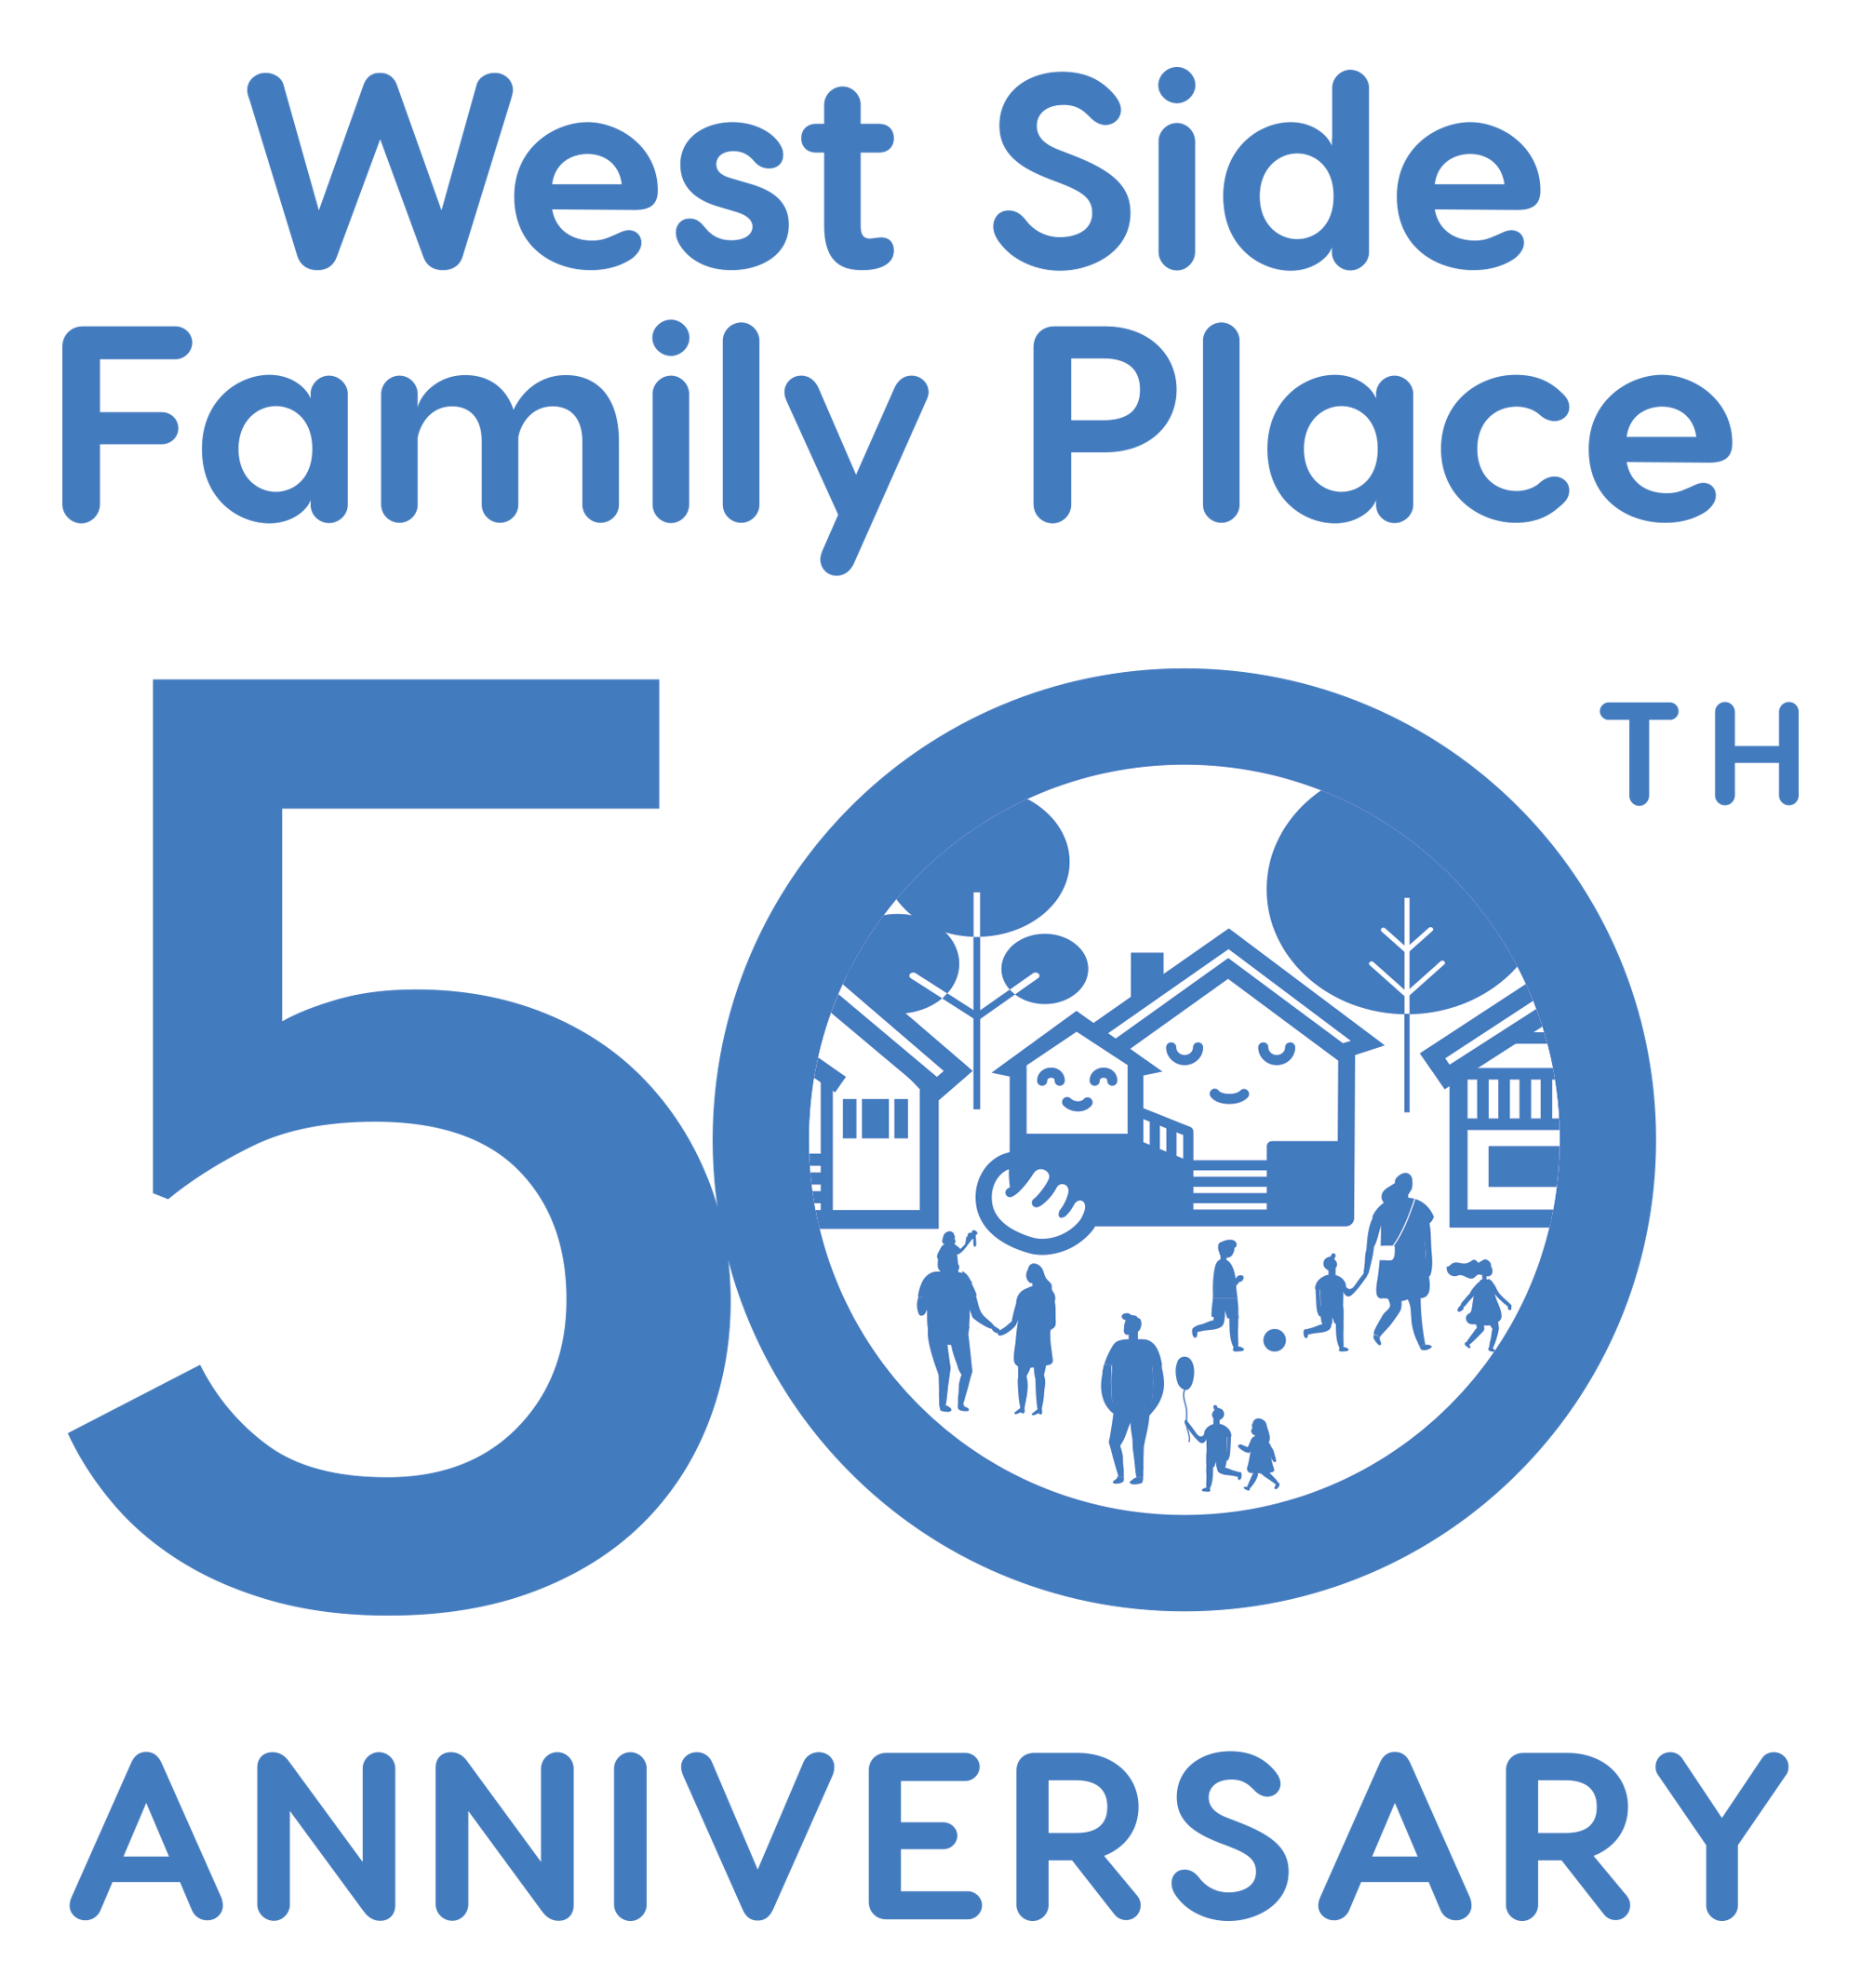 West Side Family Place